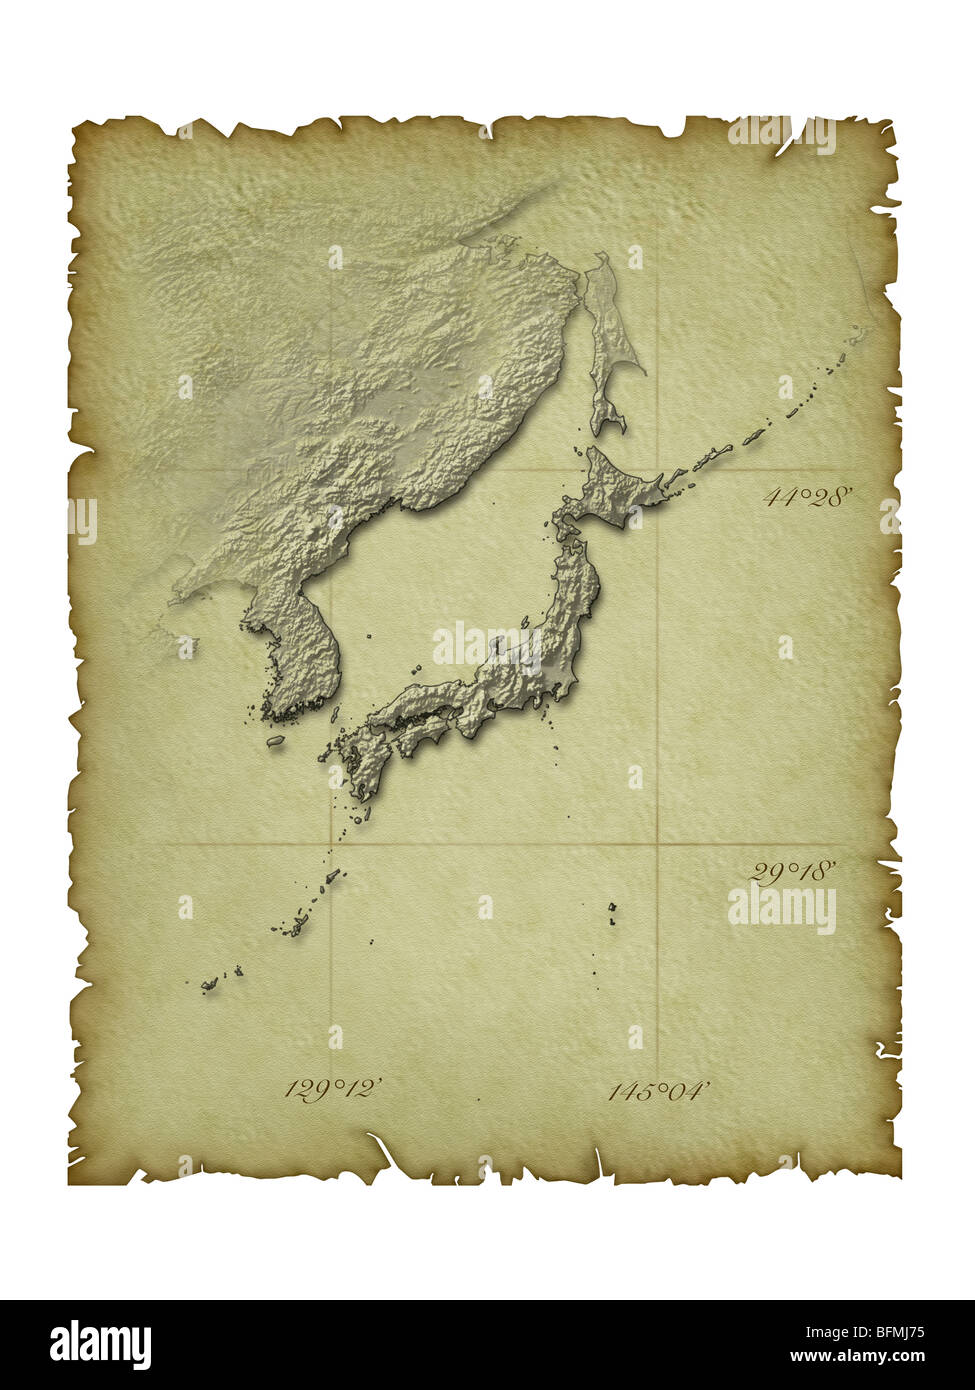 Old map of Japan white background Stock Photo